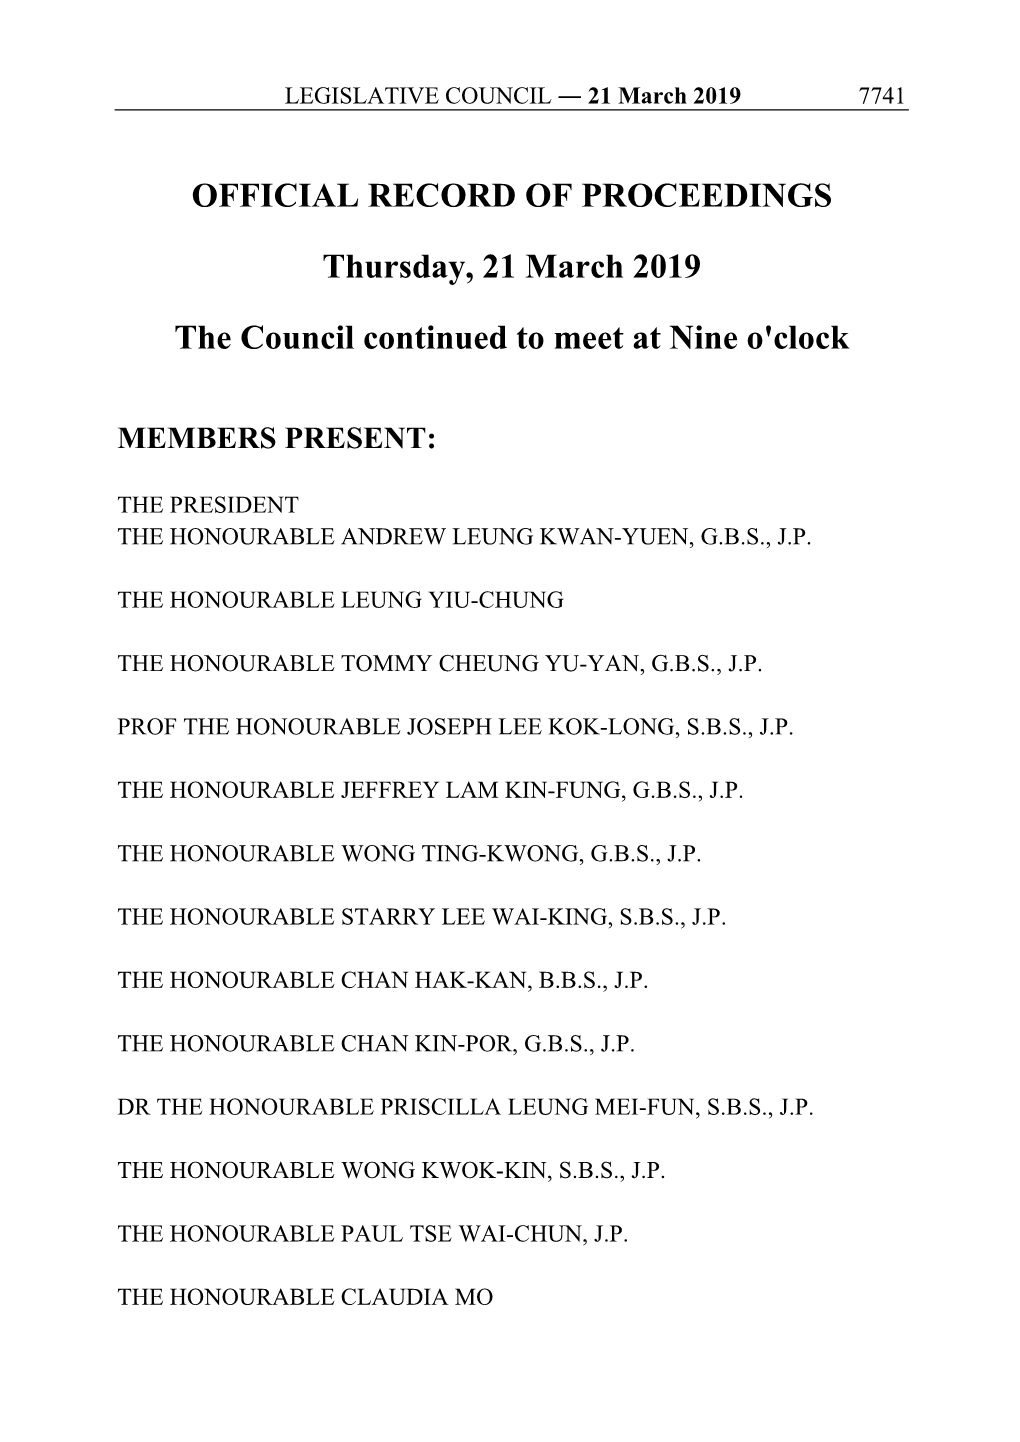 OFFICIAL RECORD of PROCEEDINGS Thursday, 21 March 2019 the Council Continued to Meet at Nine O'clock